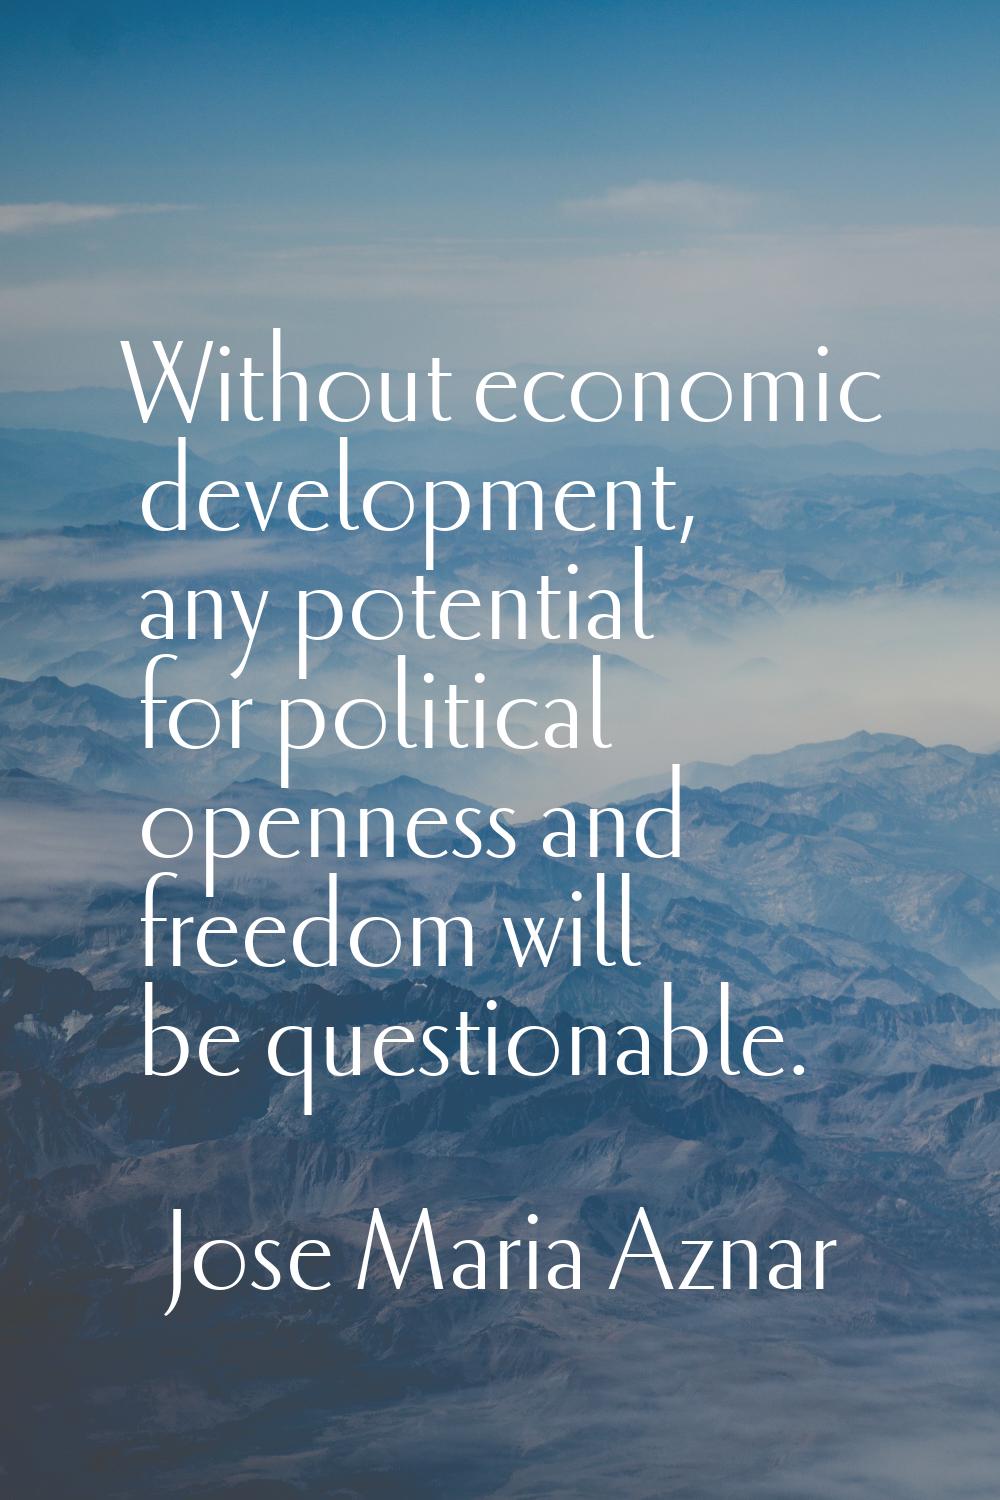 Without economic development, any potential for political openness and freedom will be questionable